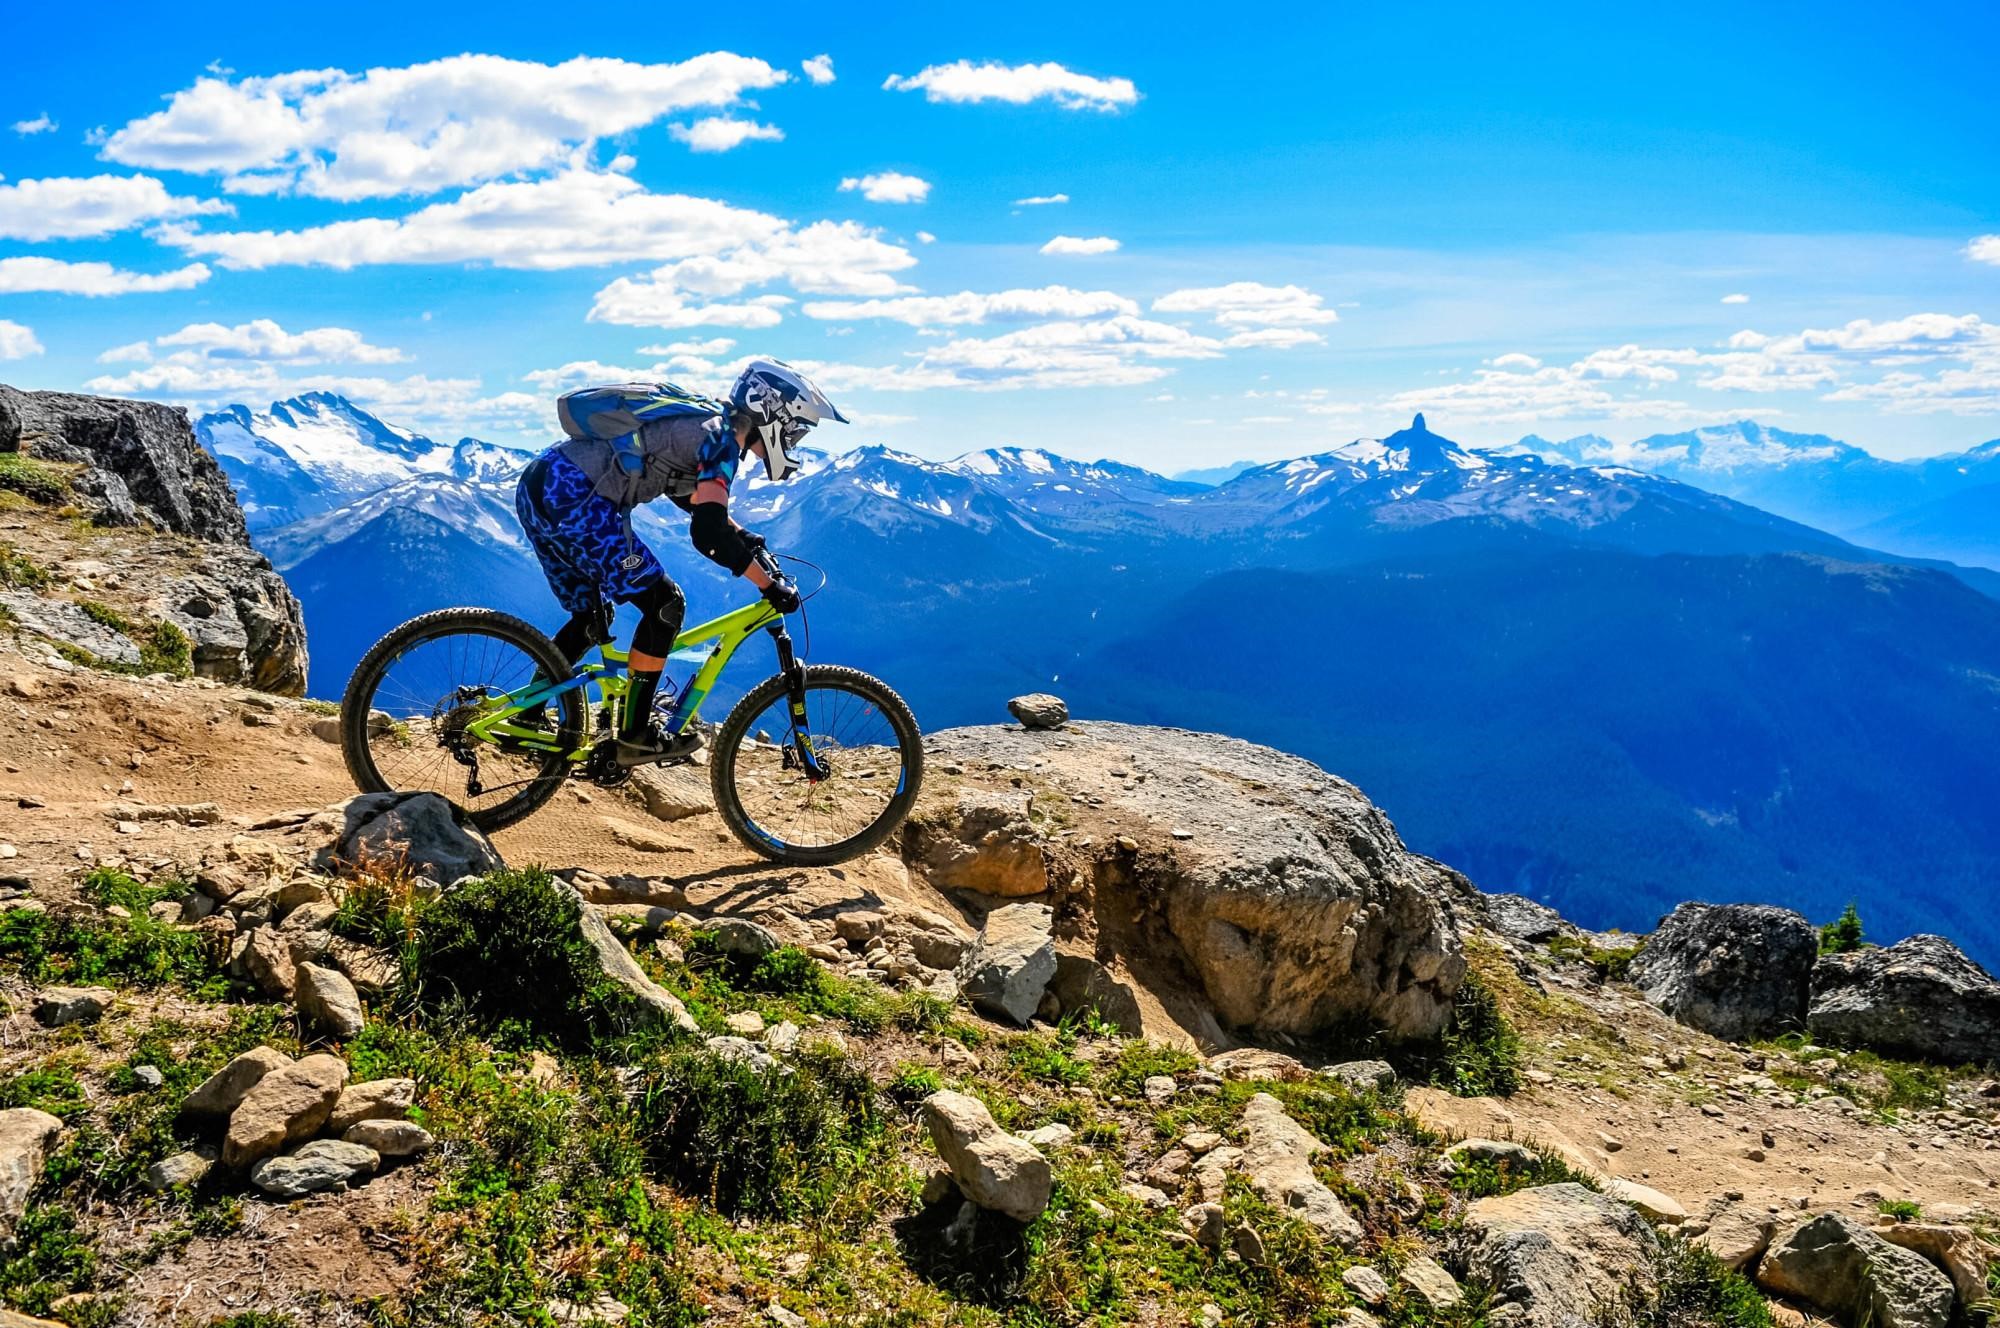 A Beginner's Guide on How to Ride a Mountain Bike